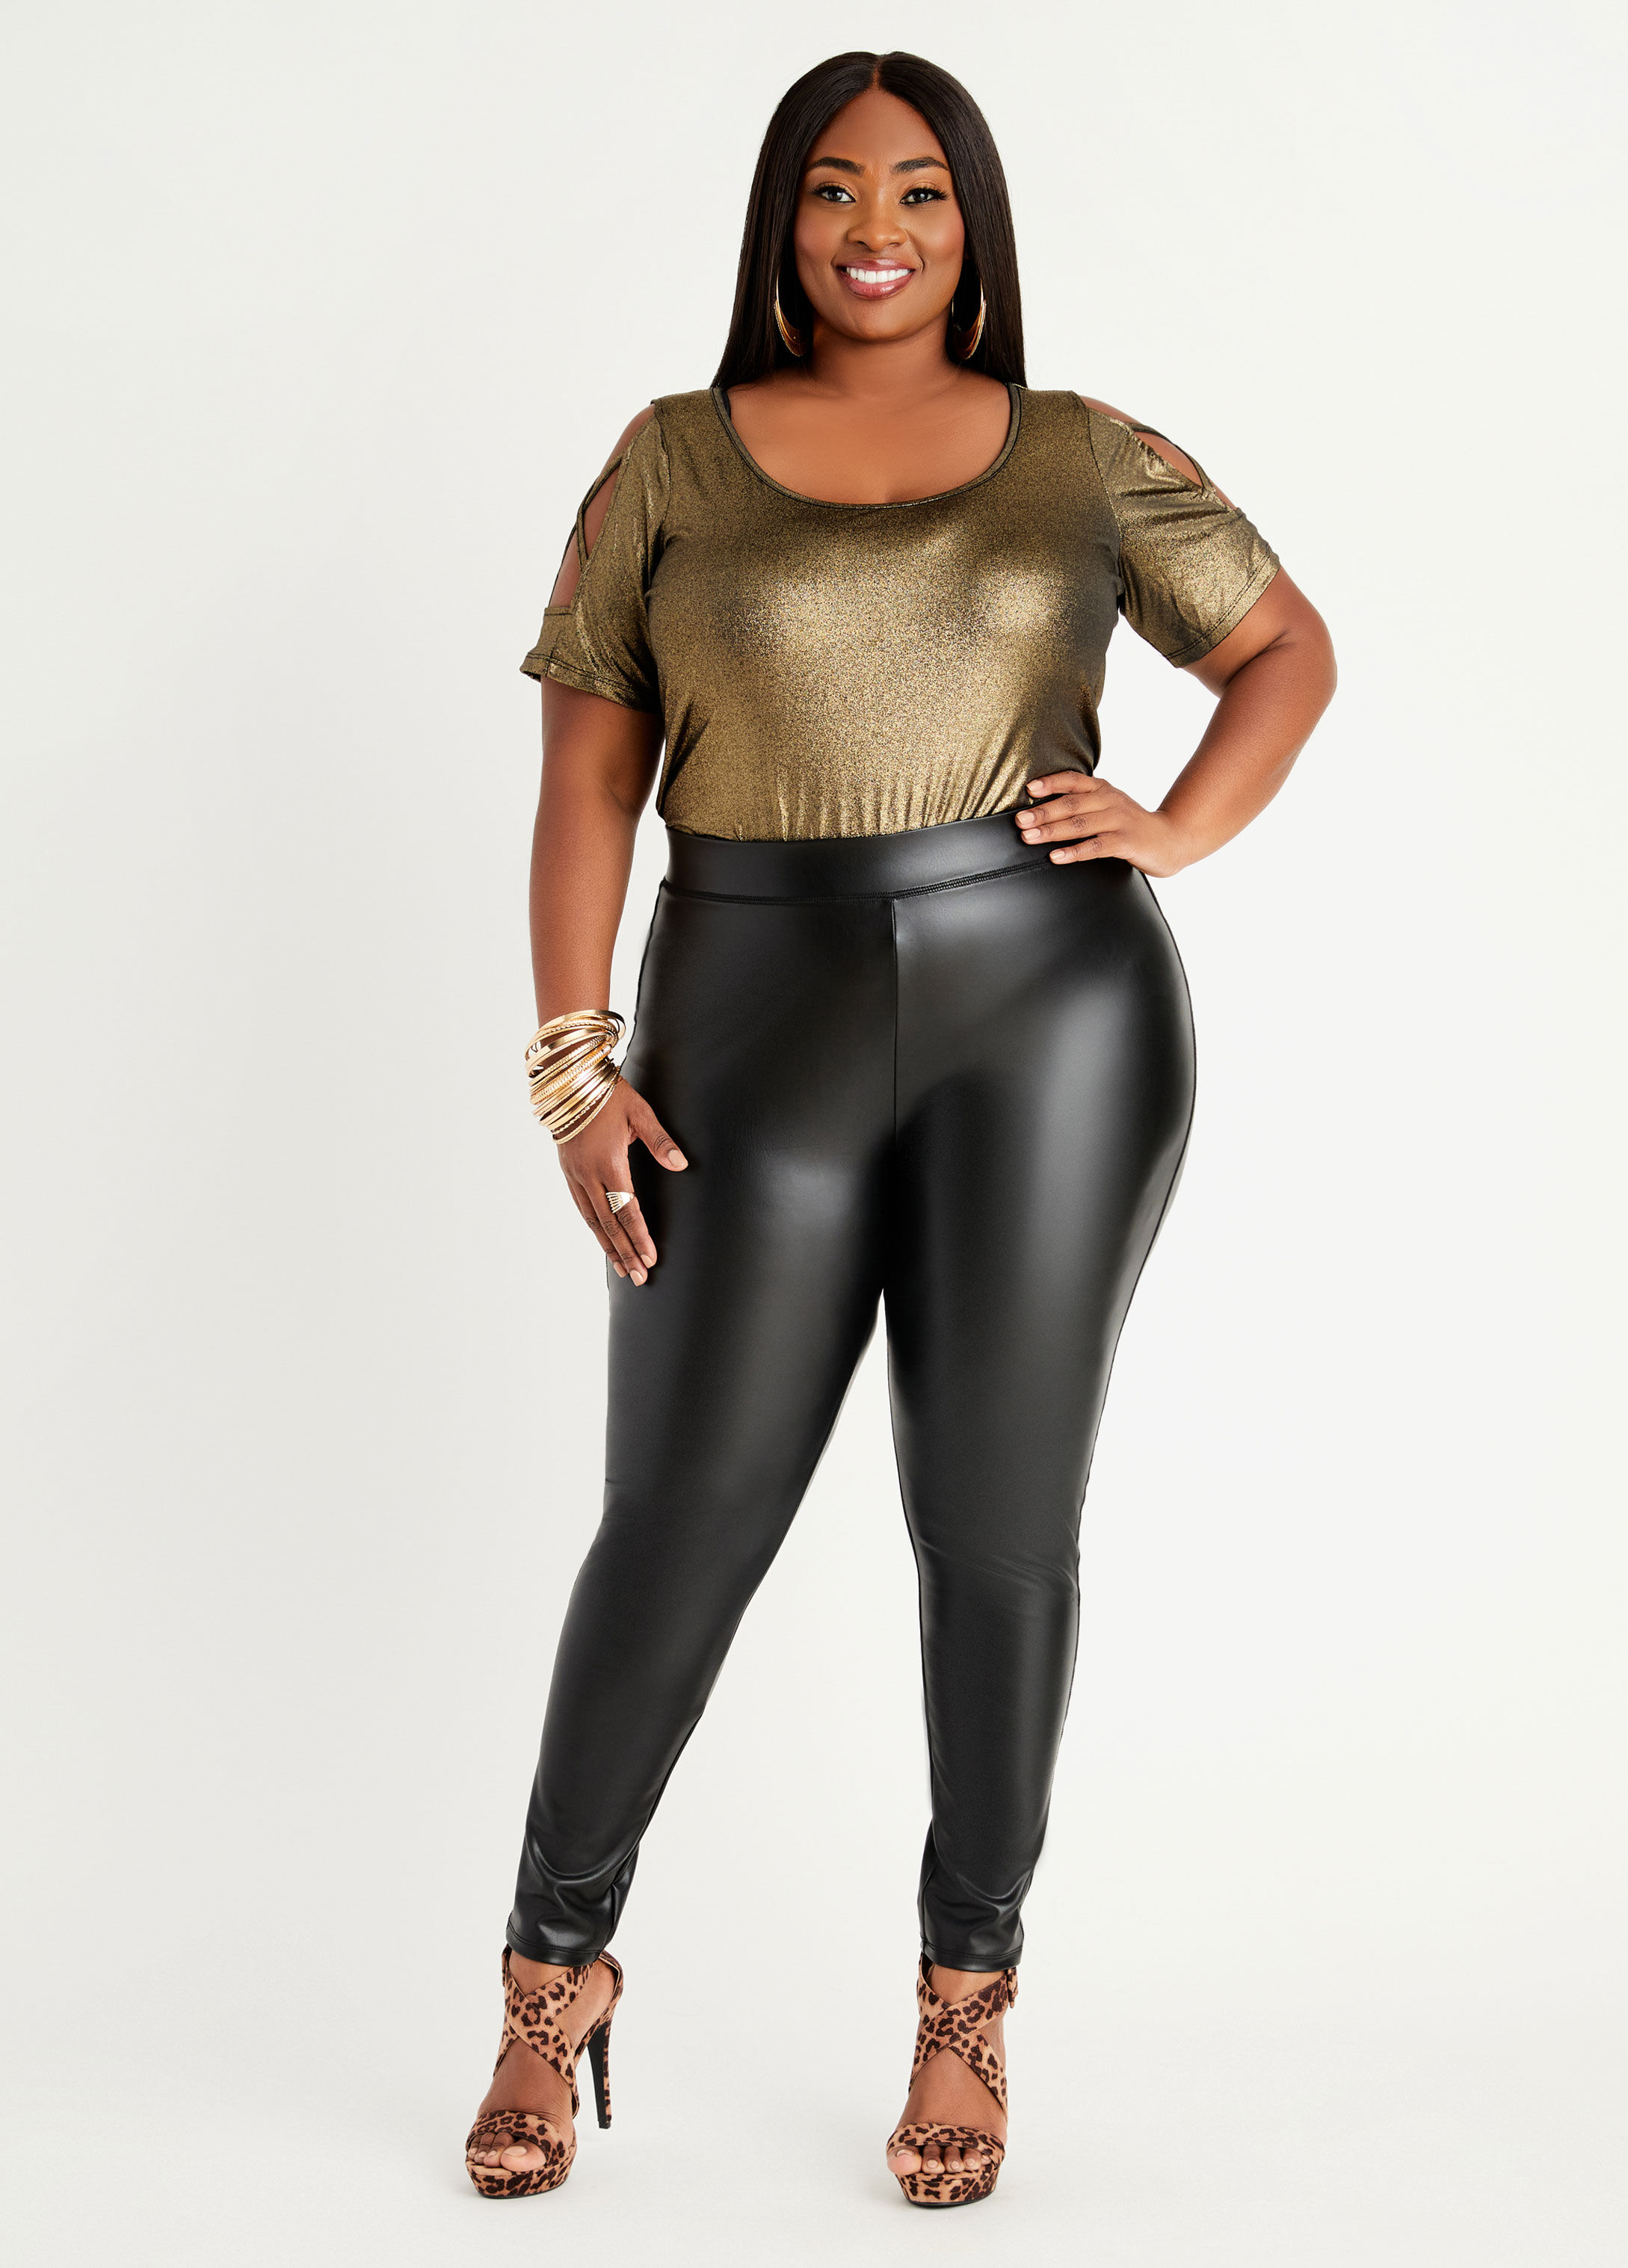 Brown Shiny Leggings|high Waist Faux Leather Leggings For Women - Seamless  Stretch Pencil Pants